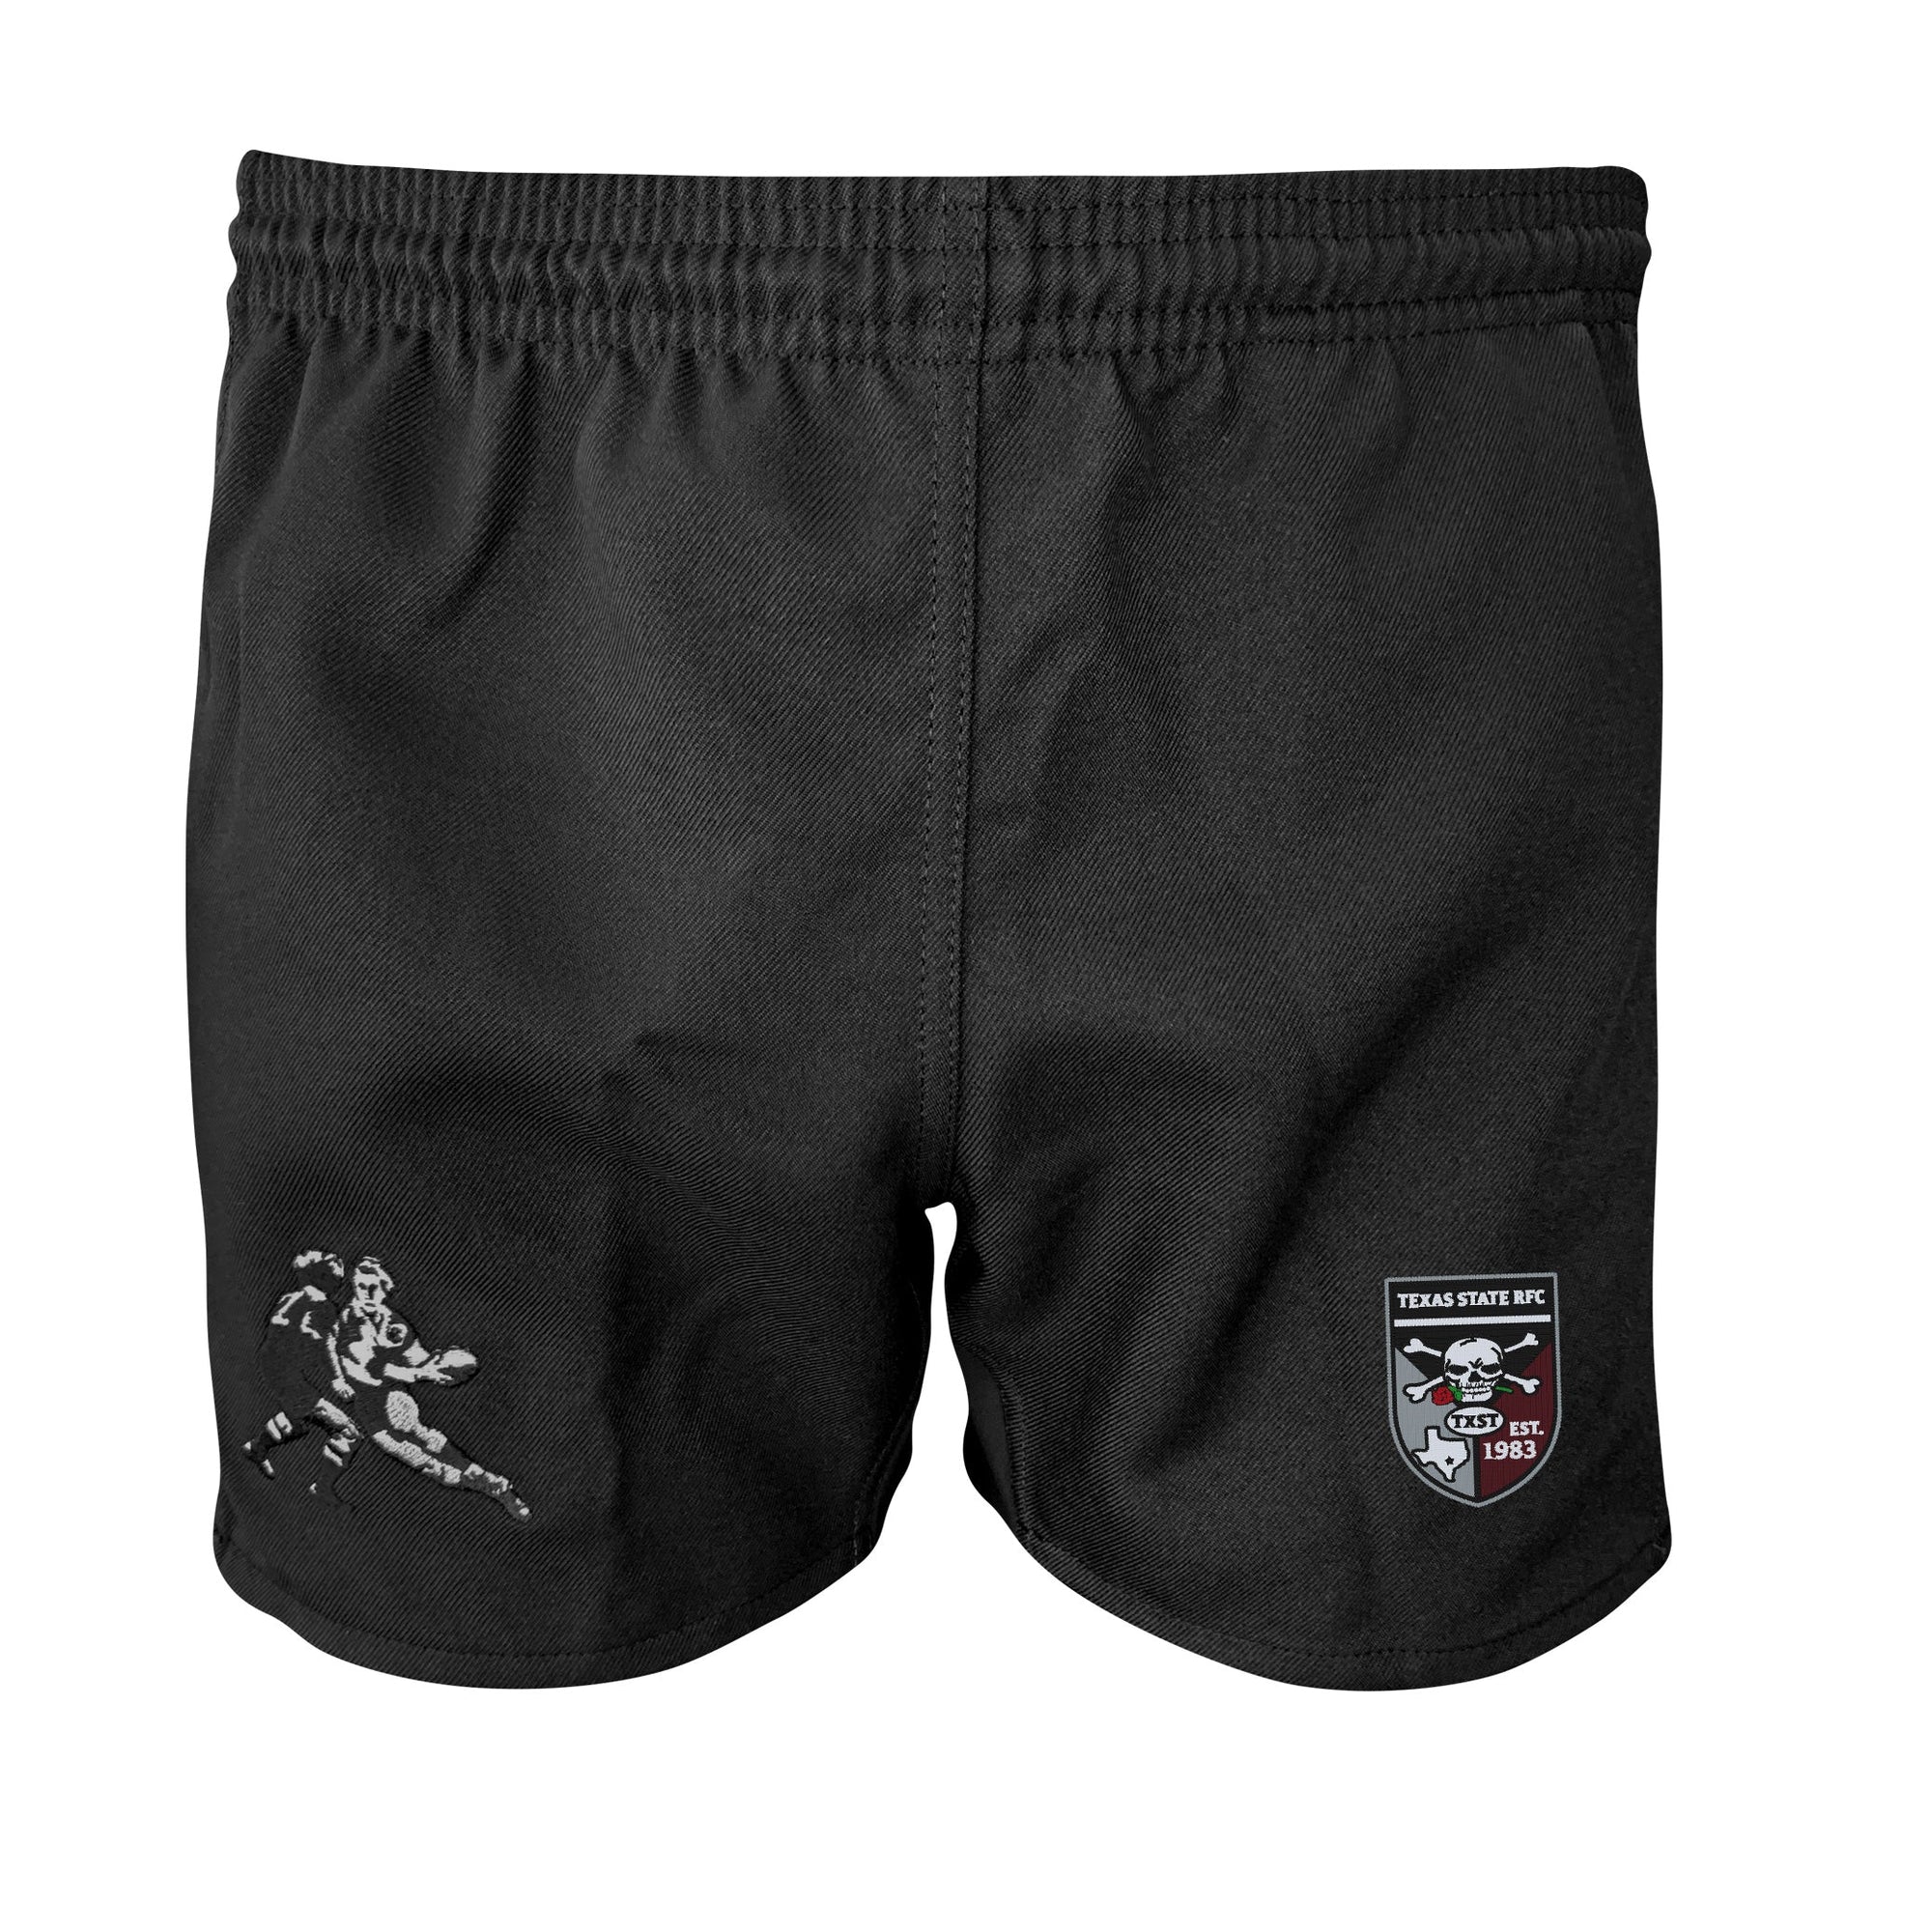 Rugby Imports Texas State Rugby Pro Power Rugby Shorts